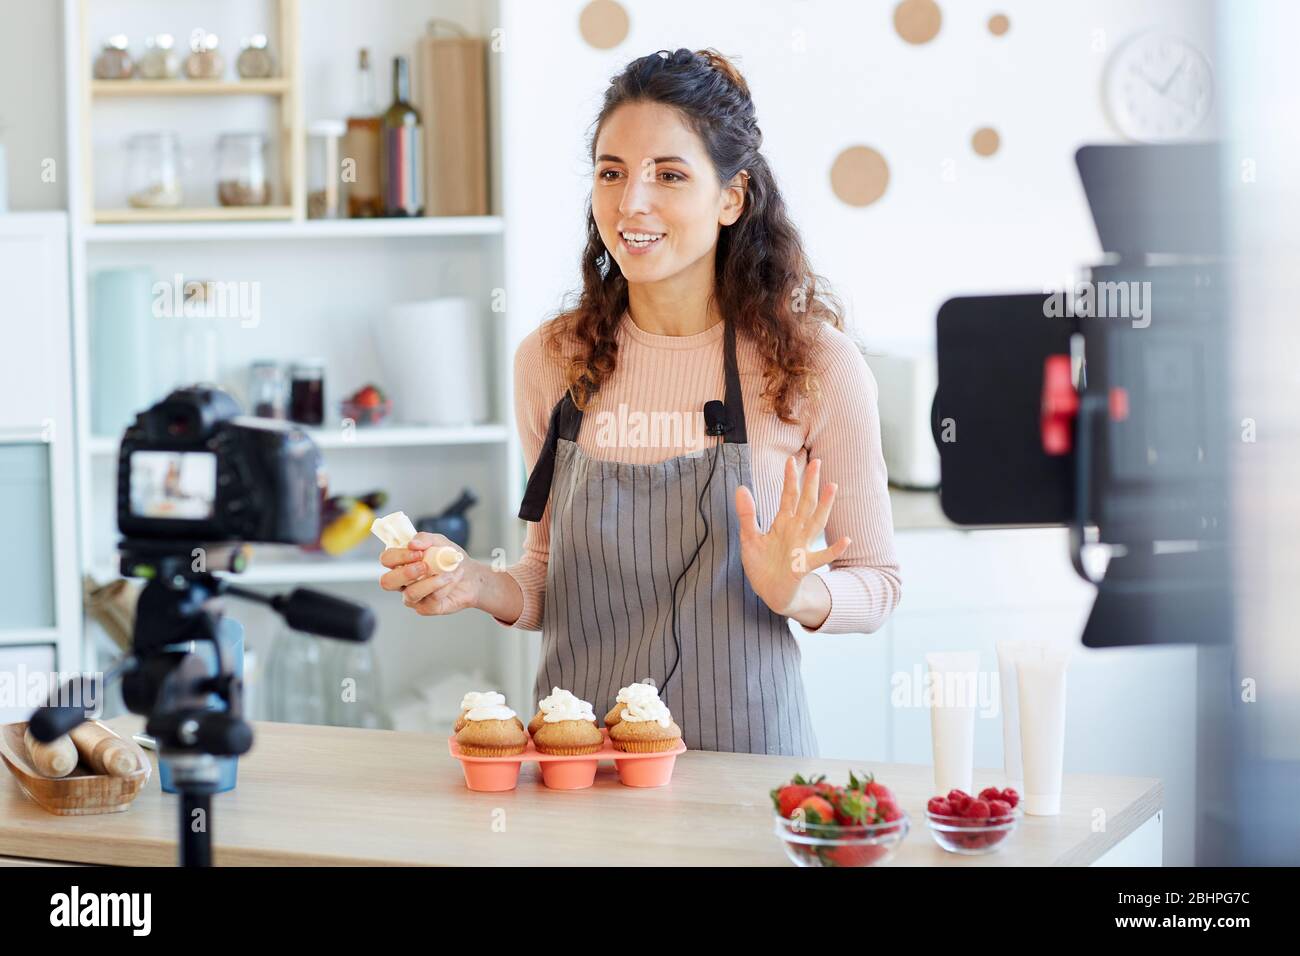 Positive young adult woman shooting homemade cupcakes video tutorial for her food blog channel Stock Photo